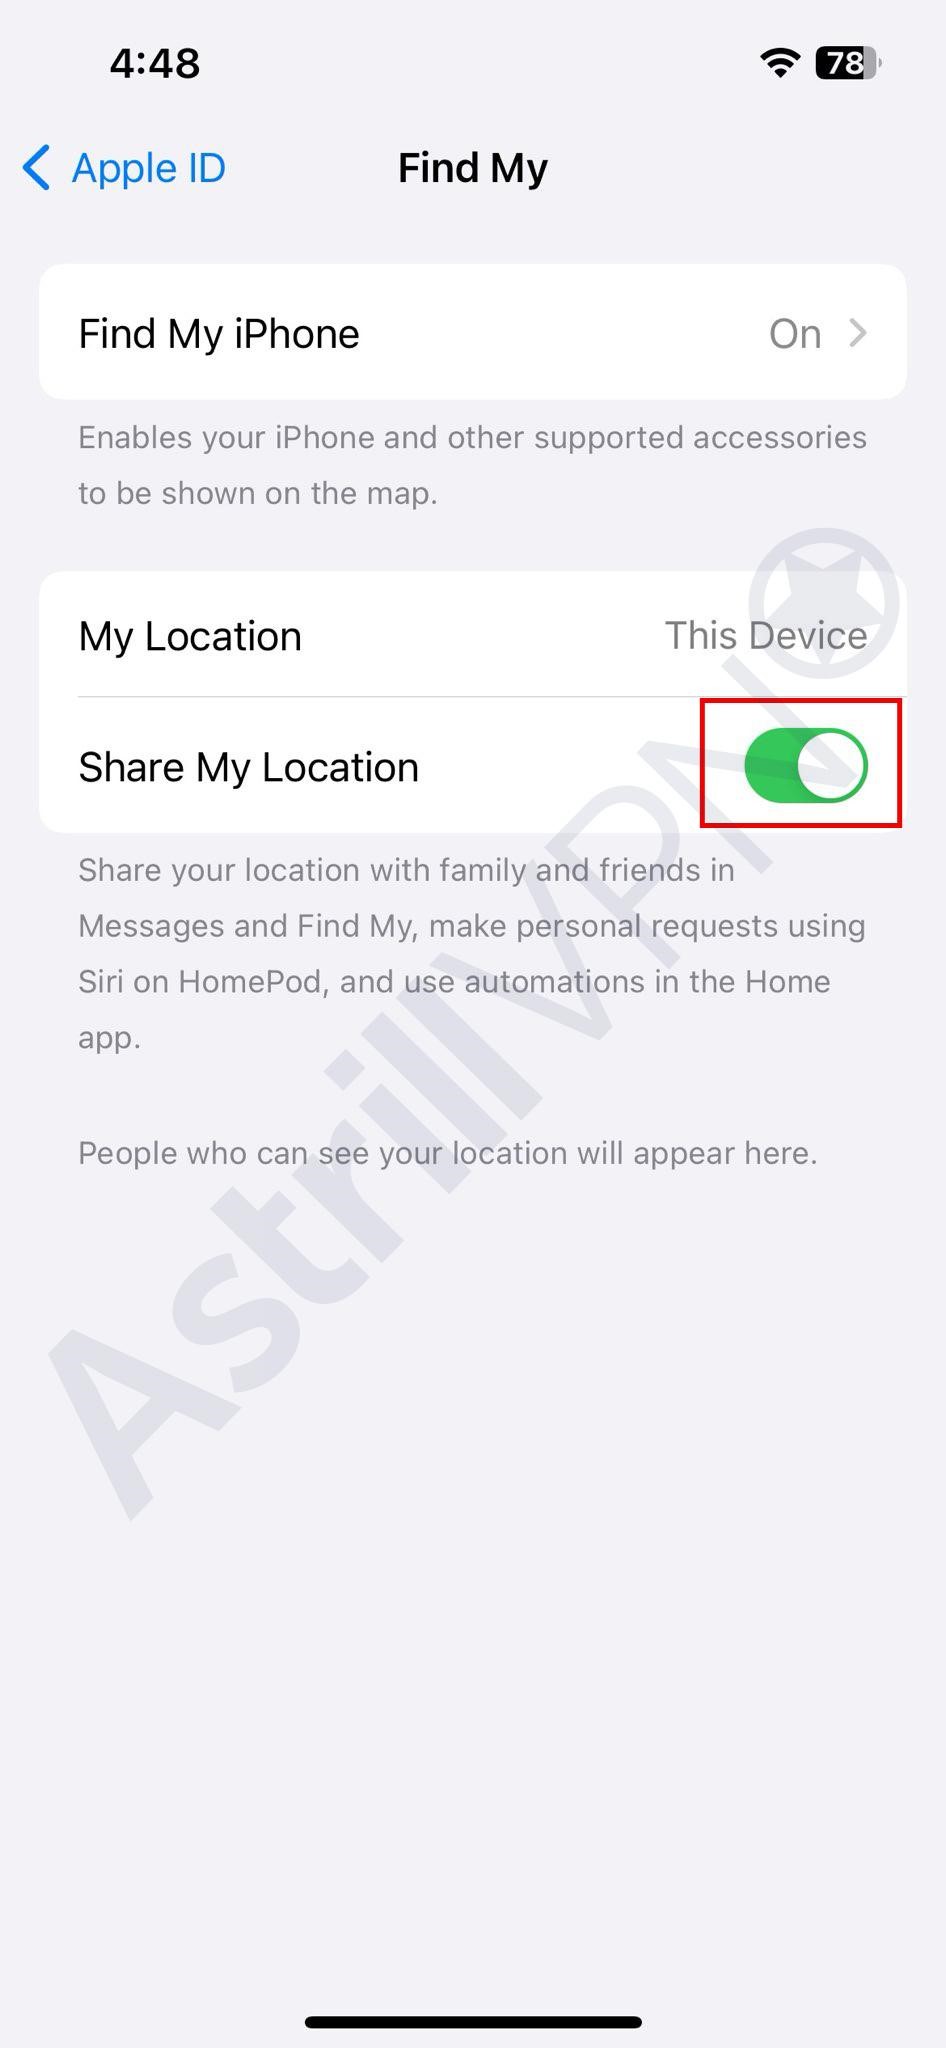 Take your second iPhone and sign in with the same Apple ID